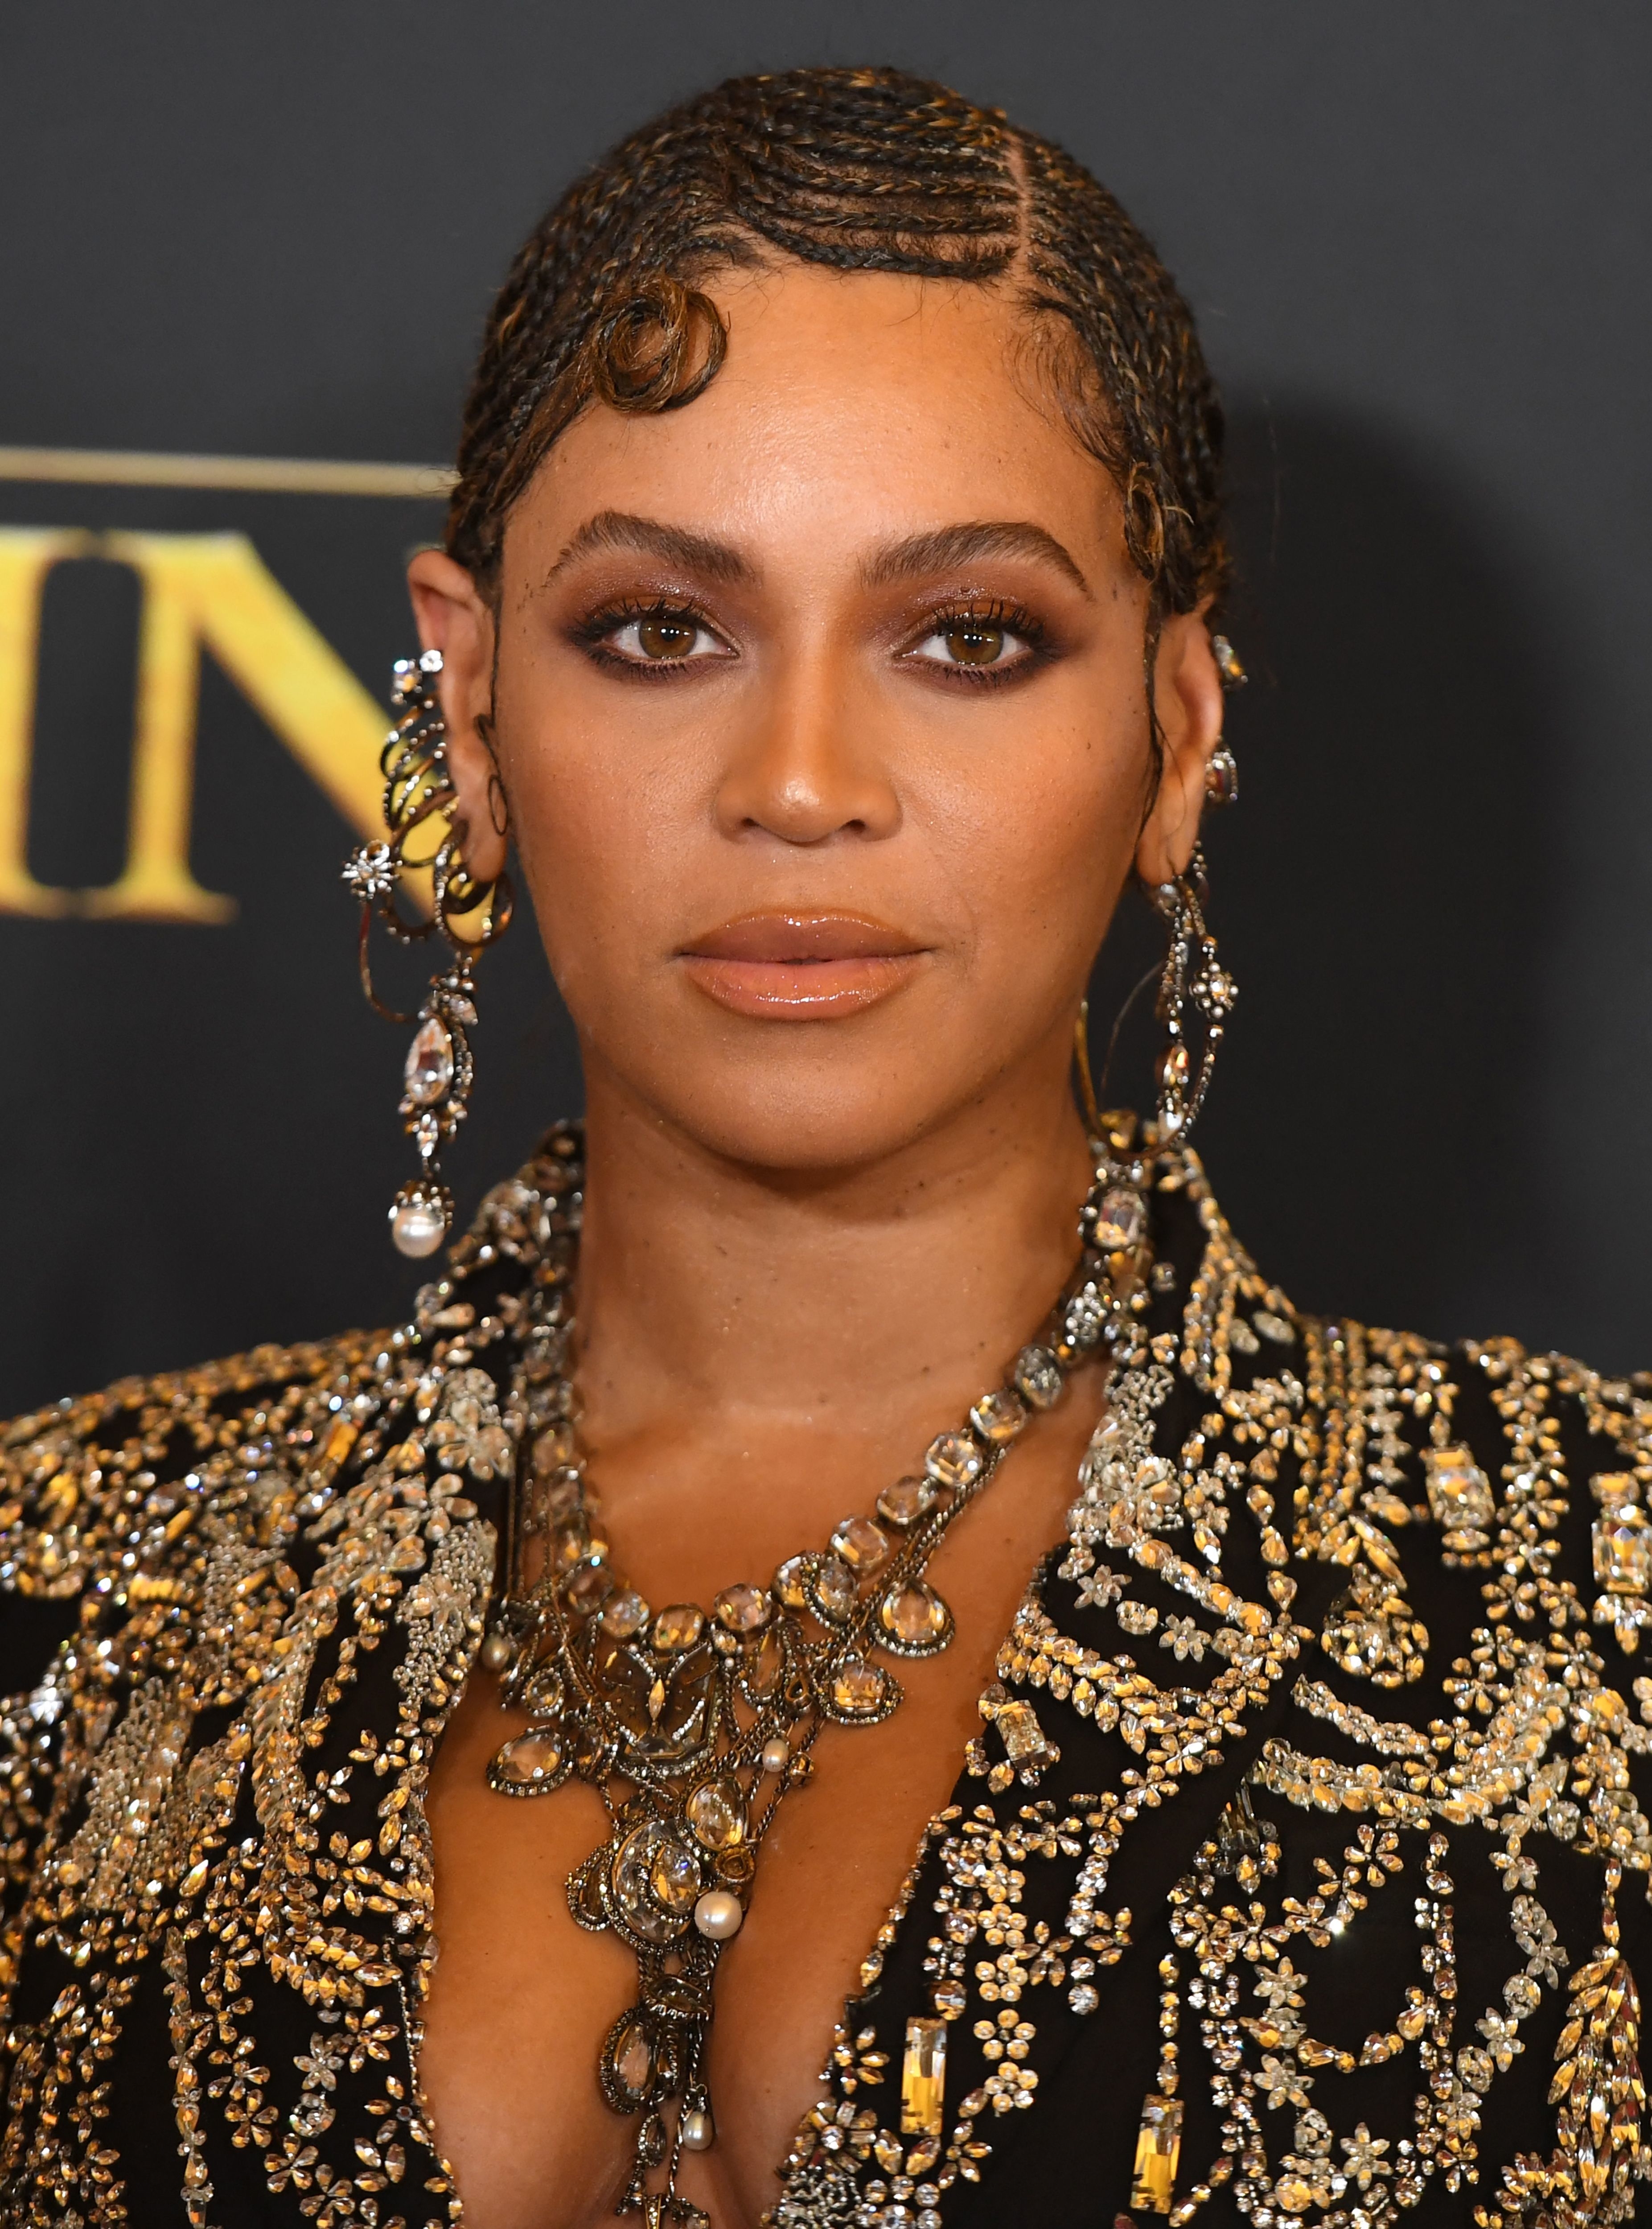 Beyoncé posing in an embellished black dress with intricate beadwork and statement earrings